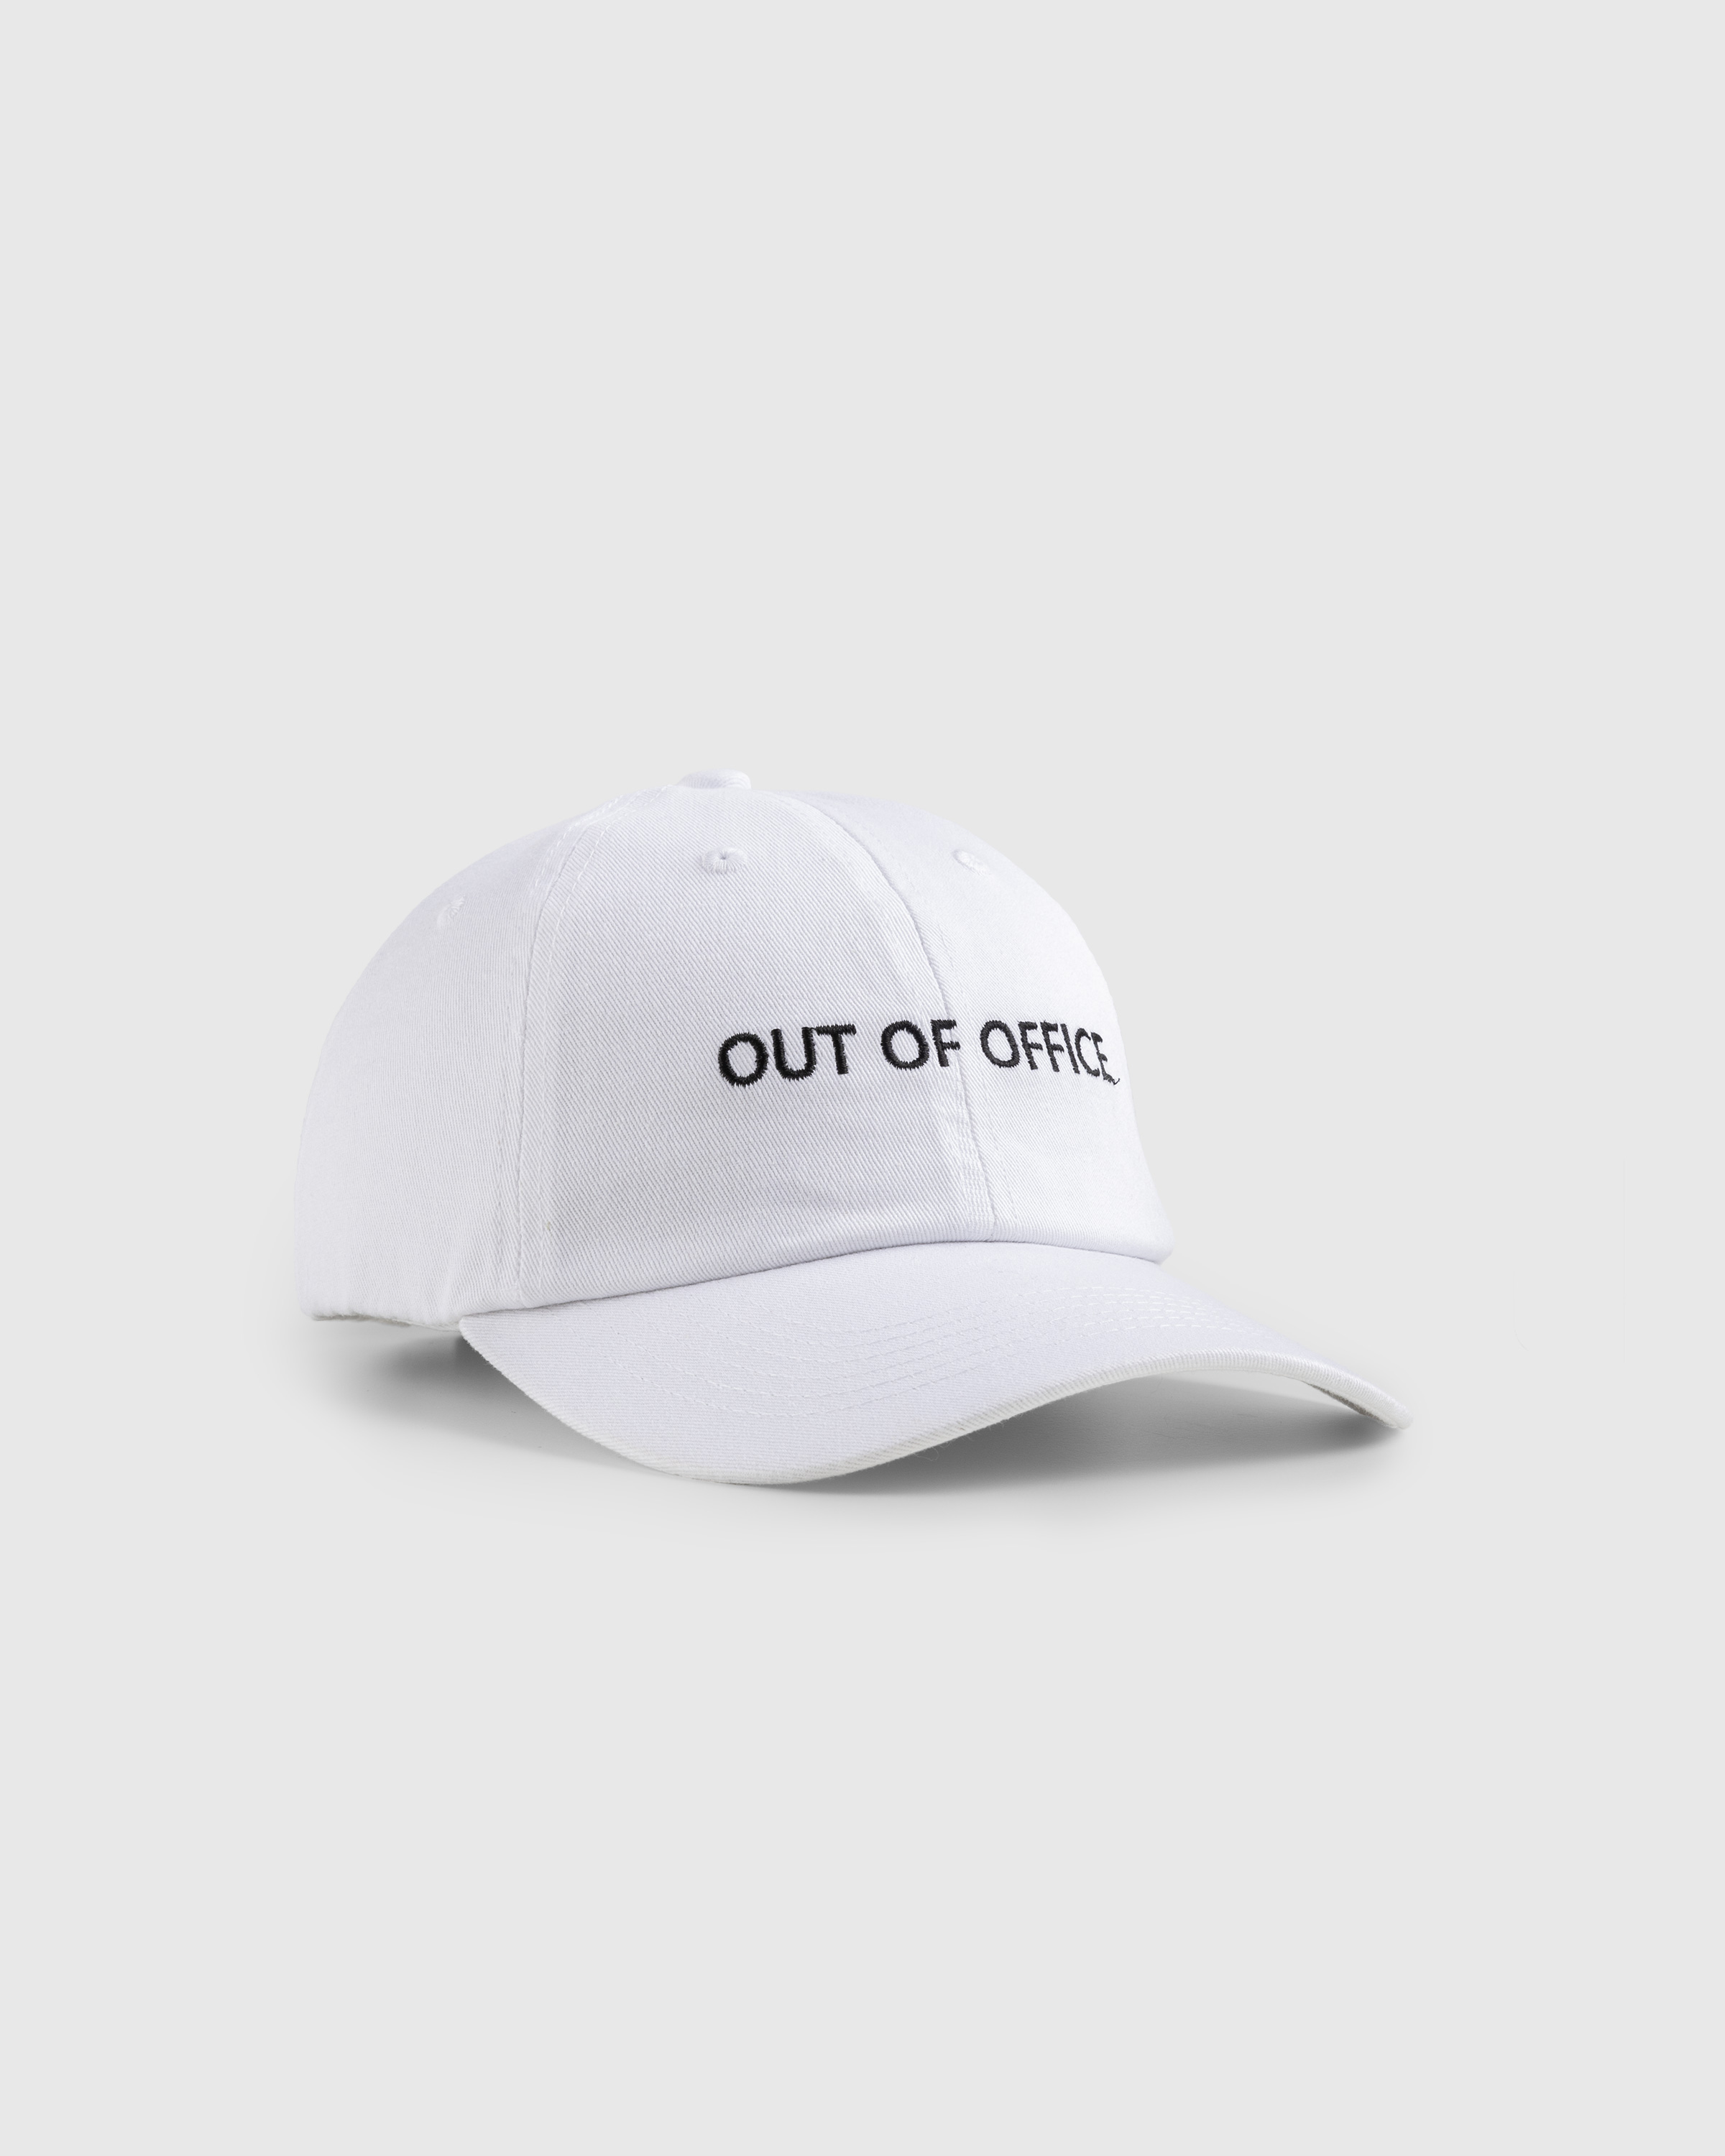 HO HO COCO – Out Of Office Hat White/Black - Caps - White - Image 1